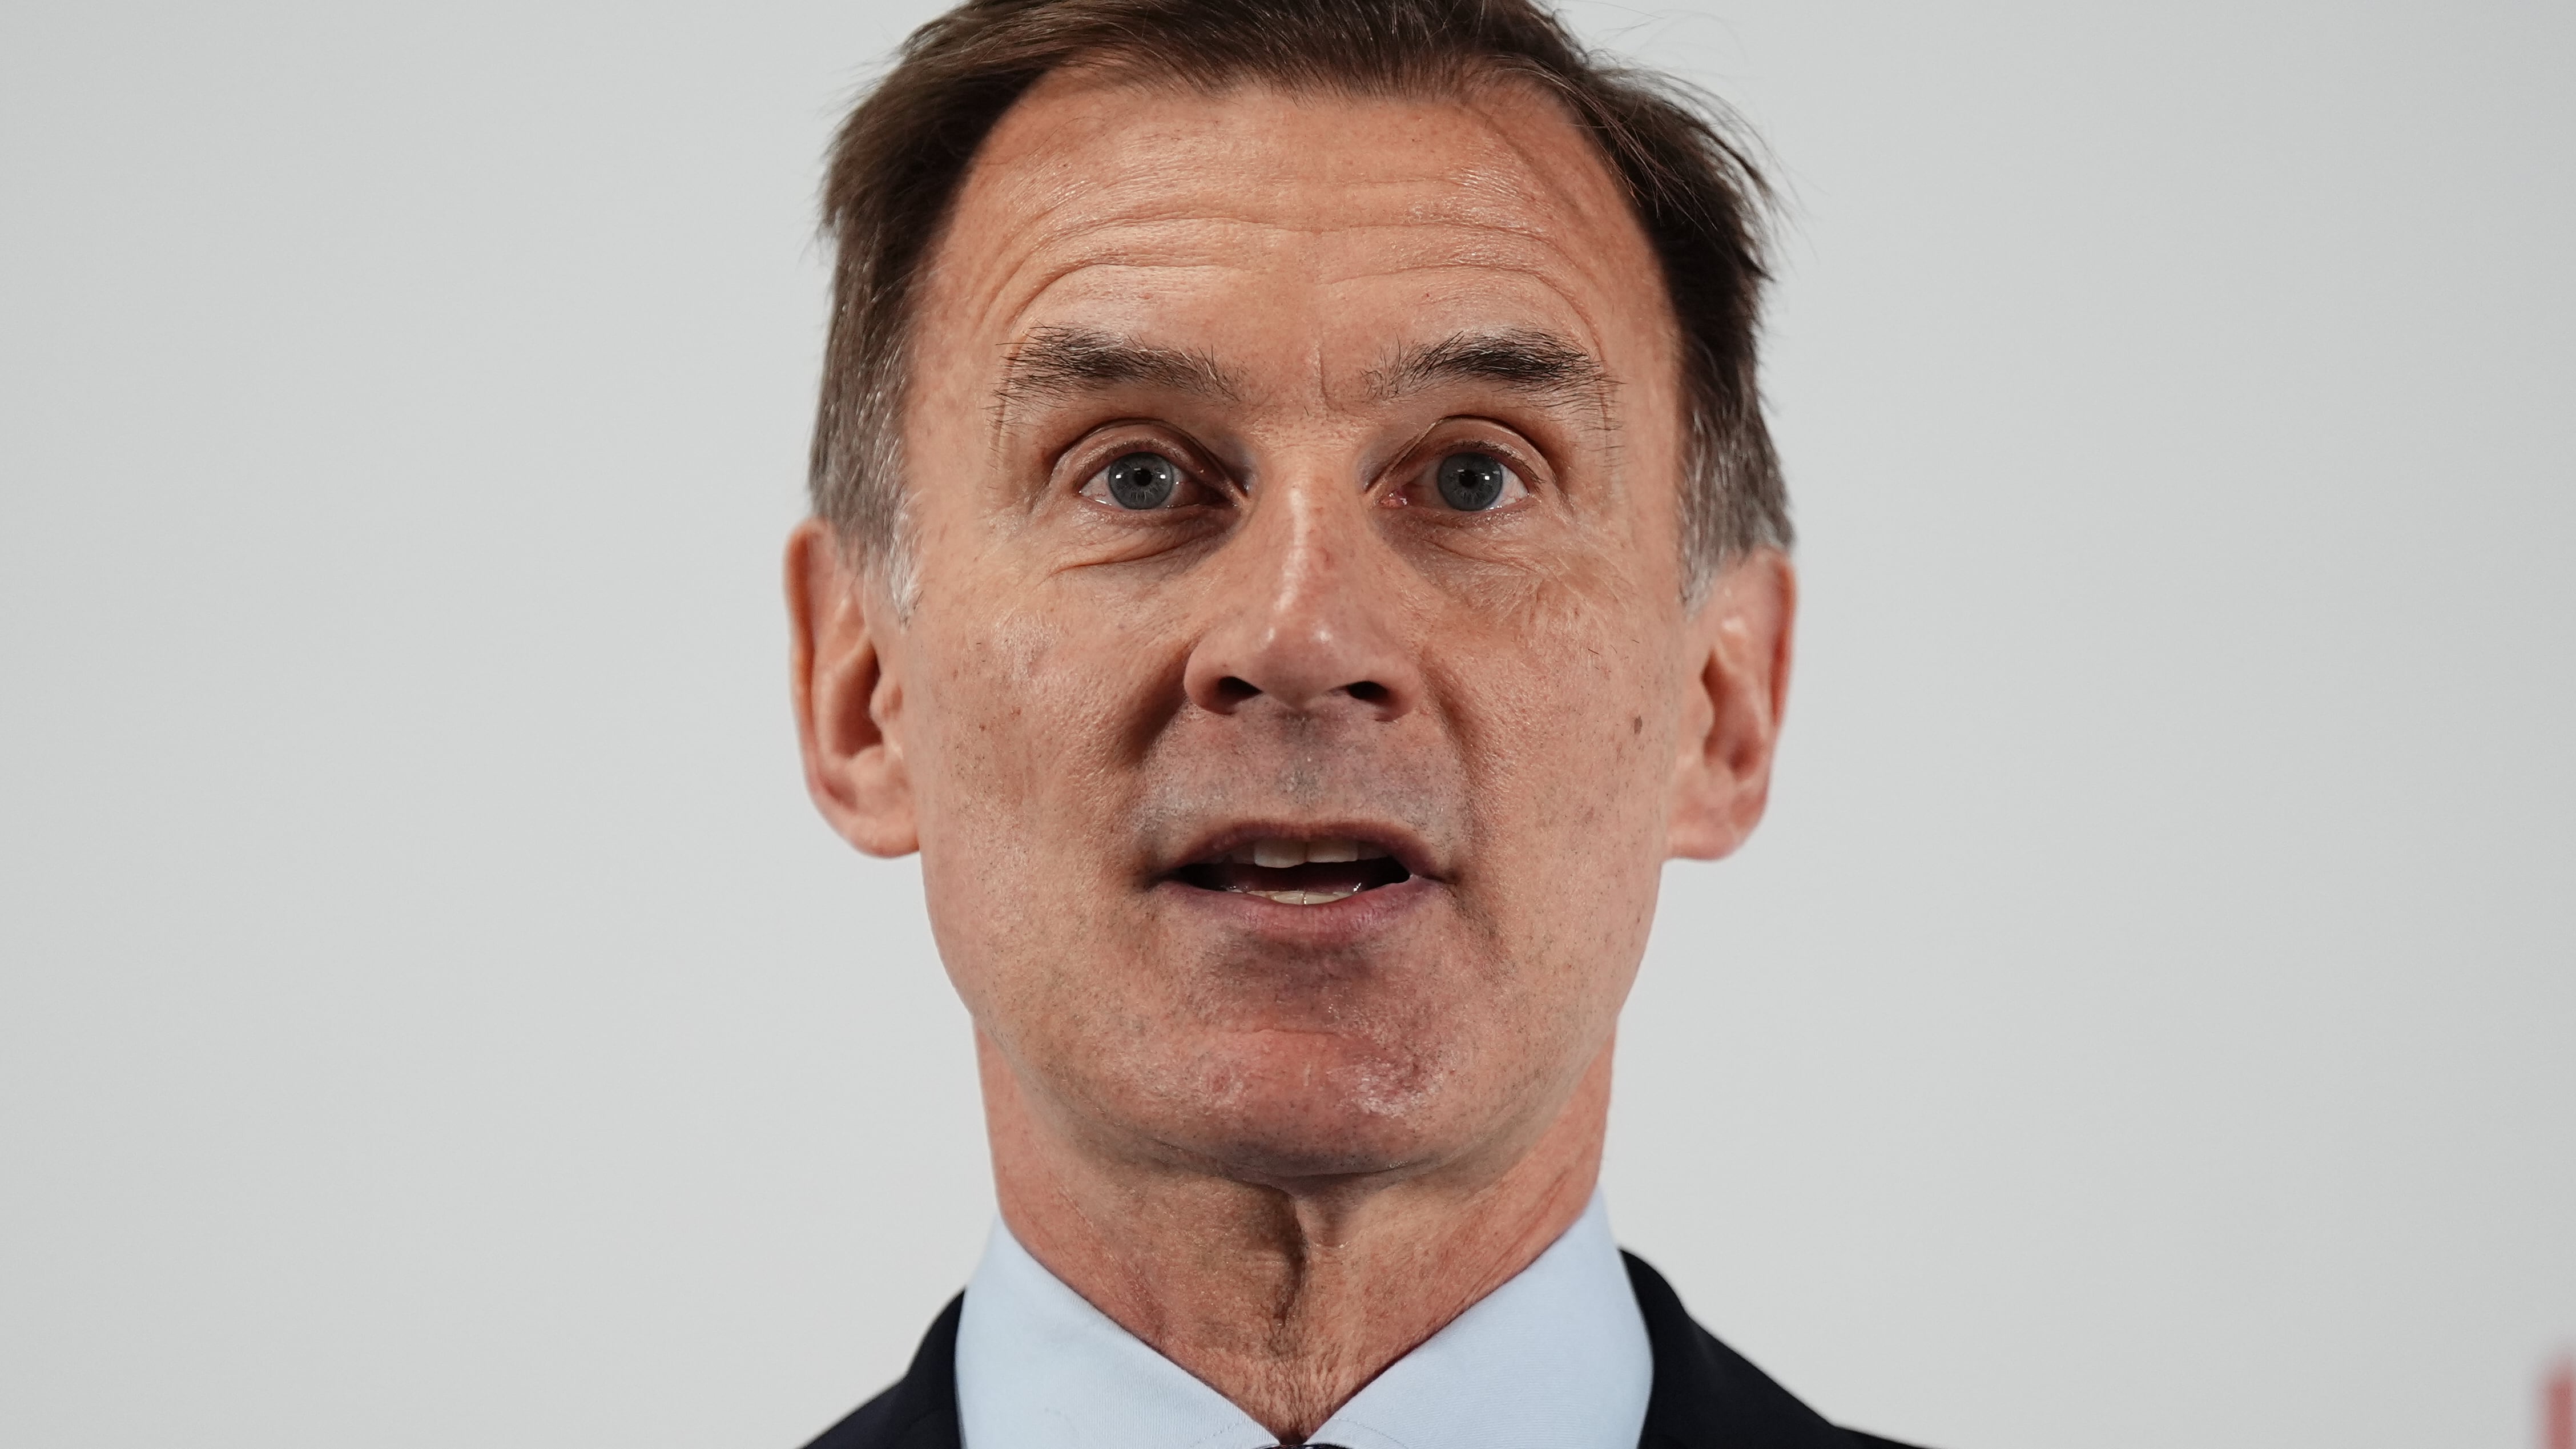 Chancellor Jeremy Hunt has lost his seat